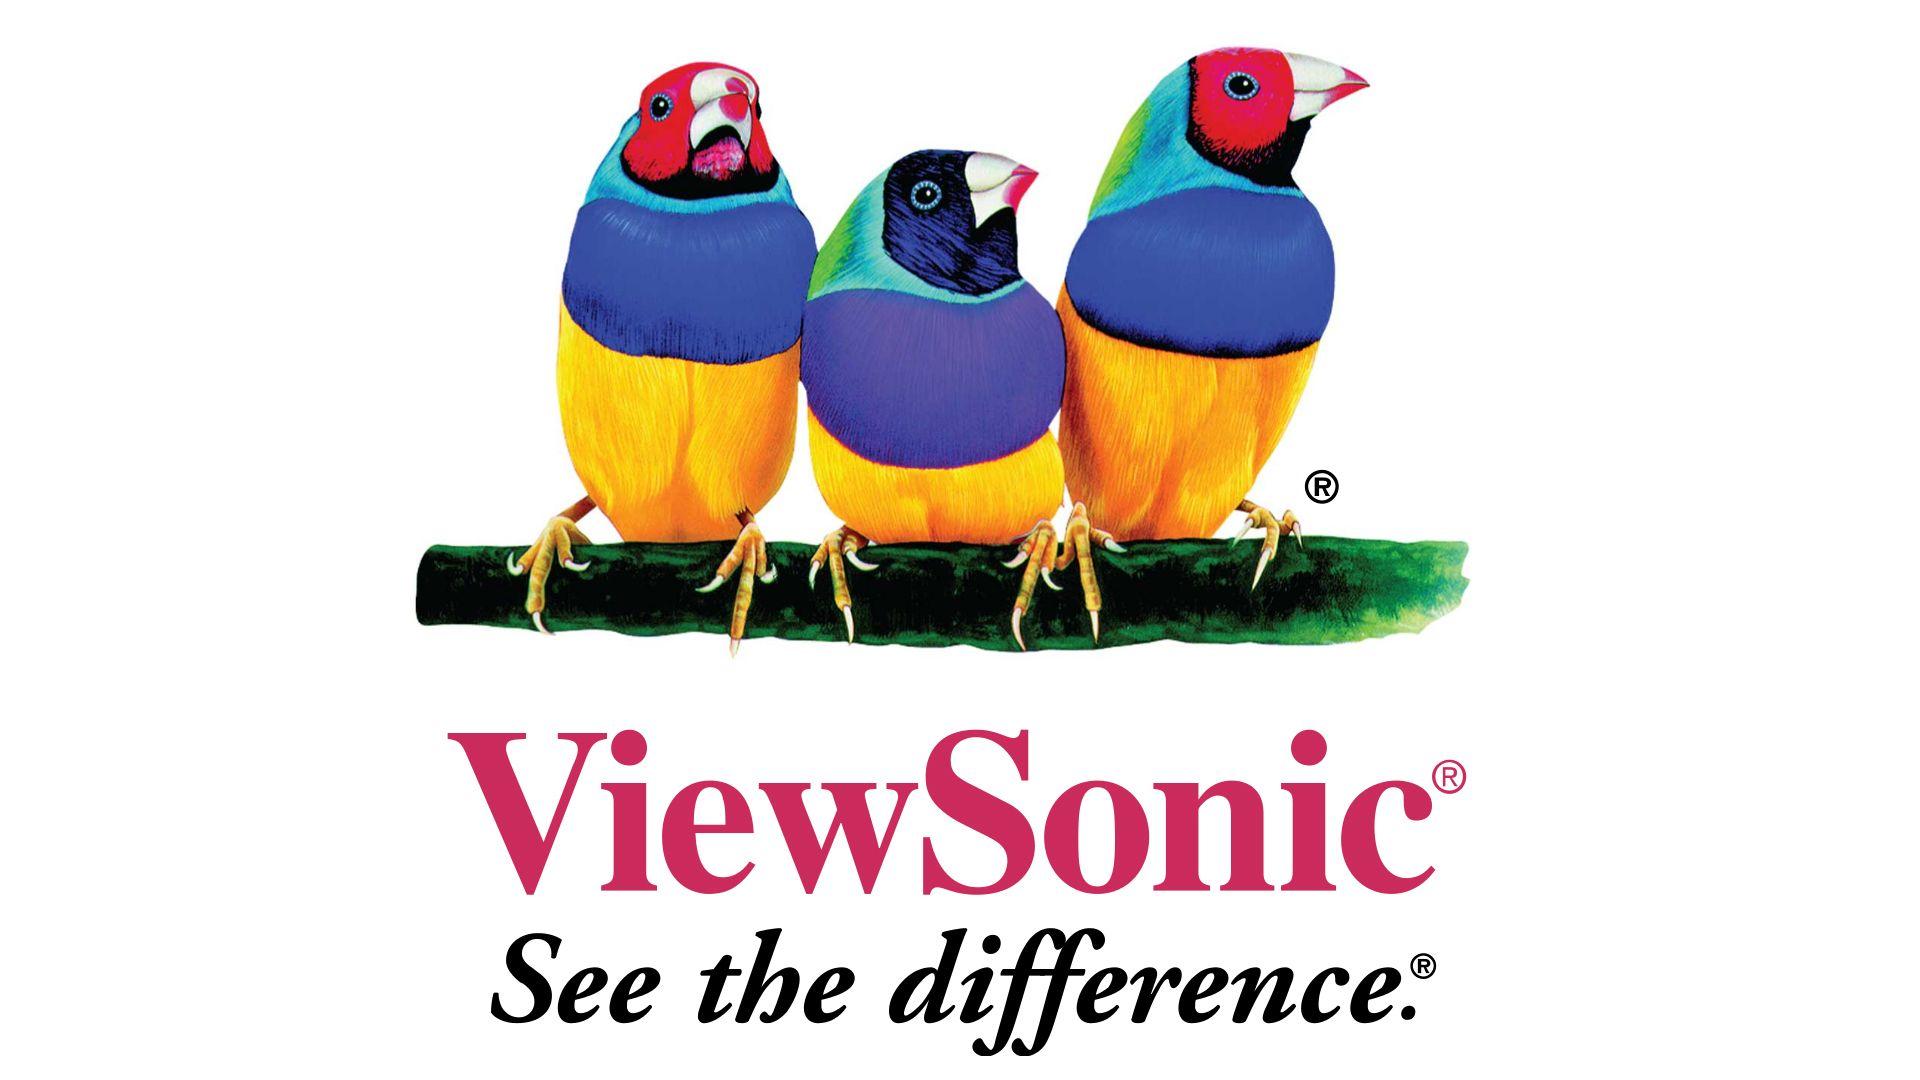 ViewSonic Logo - ViewSonic Logo, ViewSonic Symbol, Meaning, History and Evolution